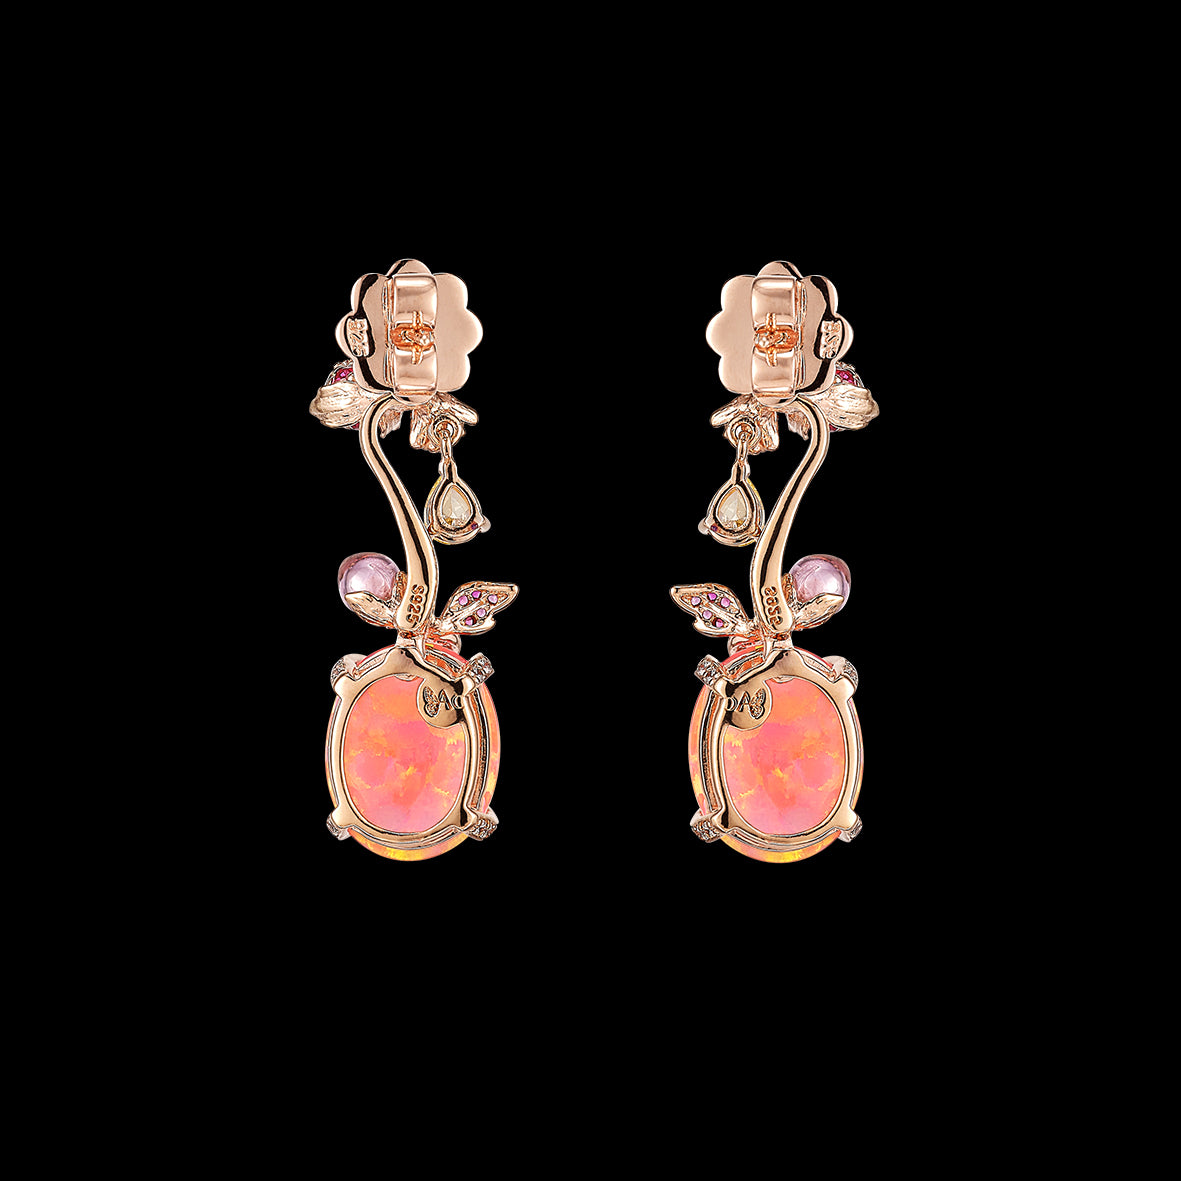 Pink Opal Carnivora Earrings, Earrings, Anabela Chan Joaillerie - Fine jewelry with laboratory grown and created gemstones hand-crafted in the United Kingdom. Anabela Chan Joaillerie is the first fine jewellery brand in the world to champion laboratory-grown and created gemstones with high jewellery design, artisanal craftsmanship and a focus on ethical and sustainable innovations.